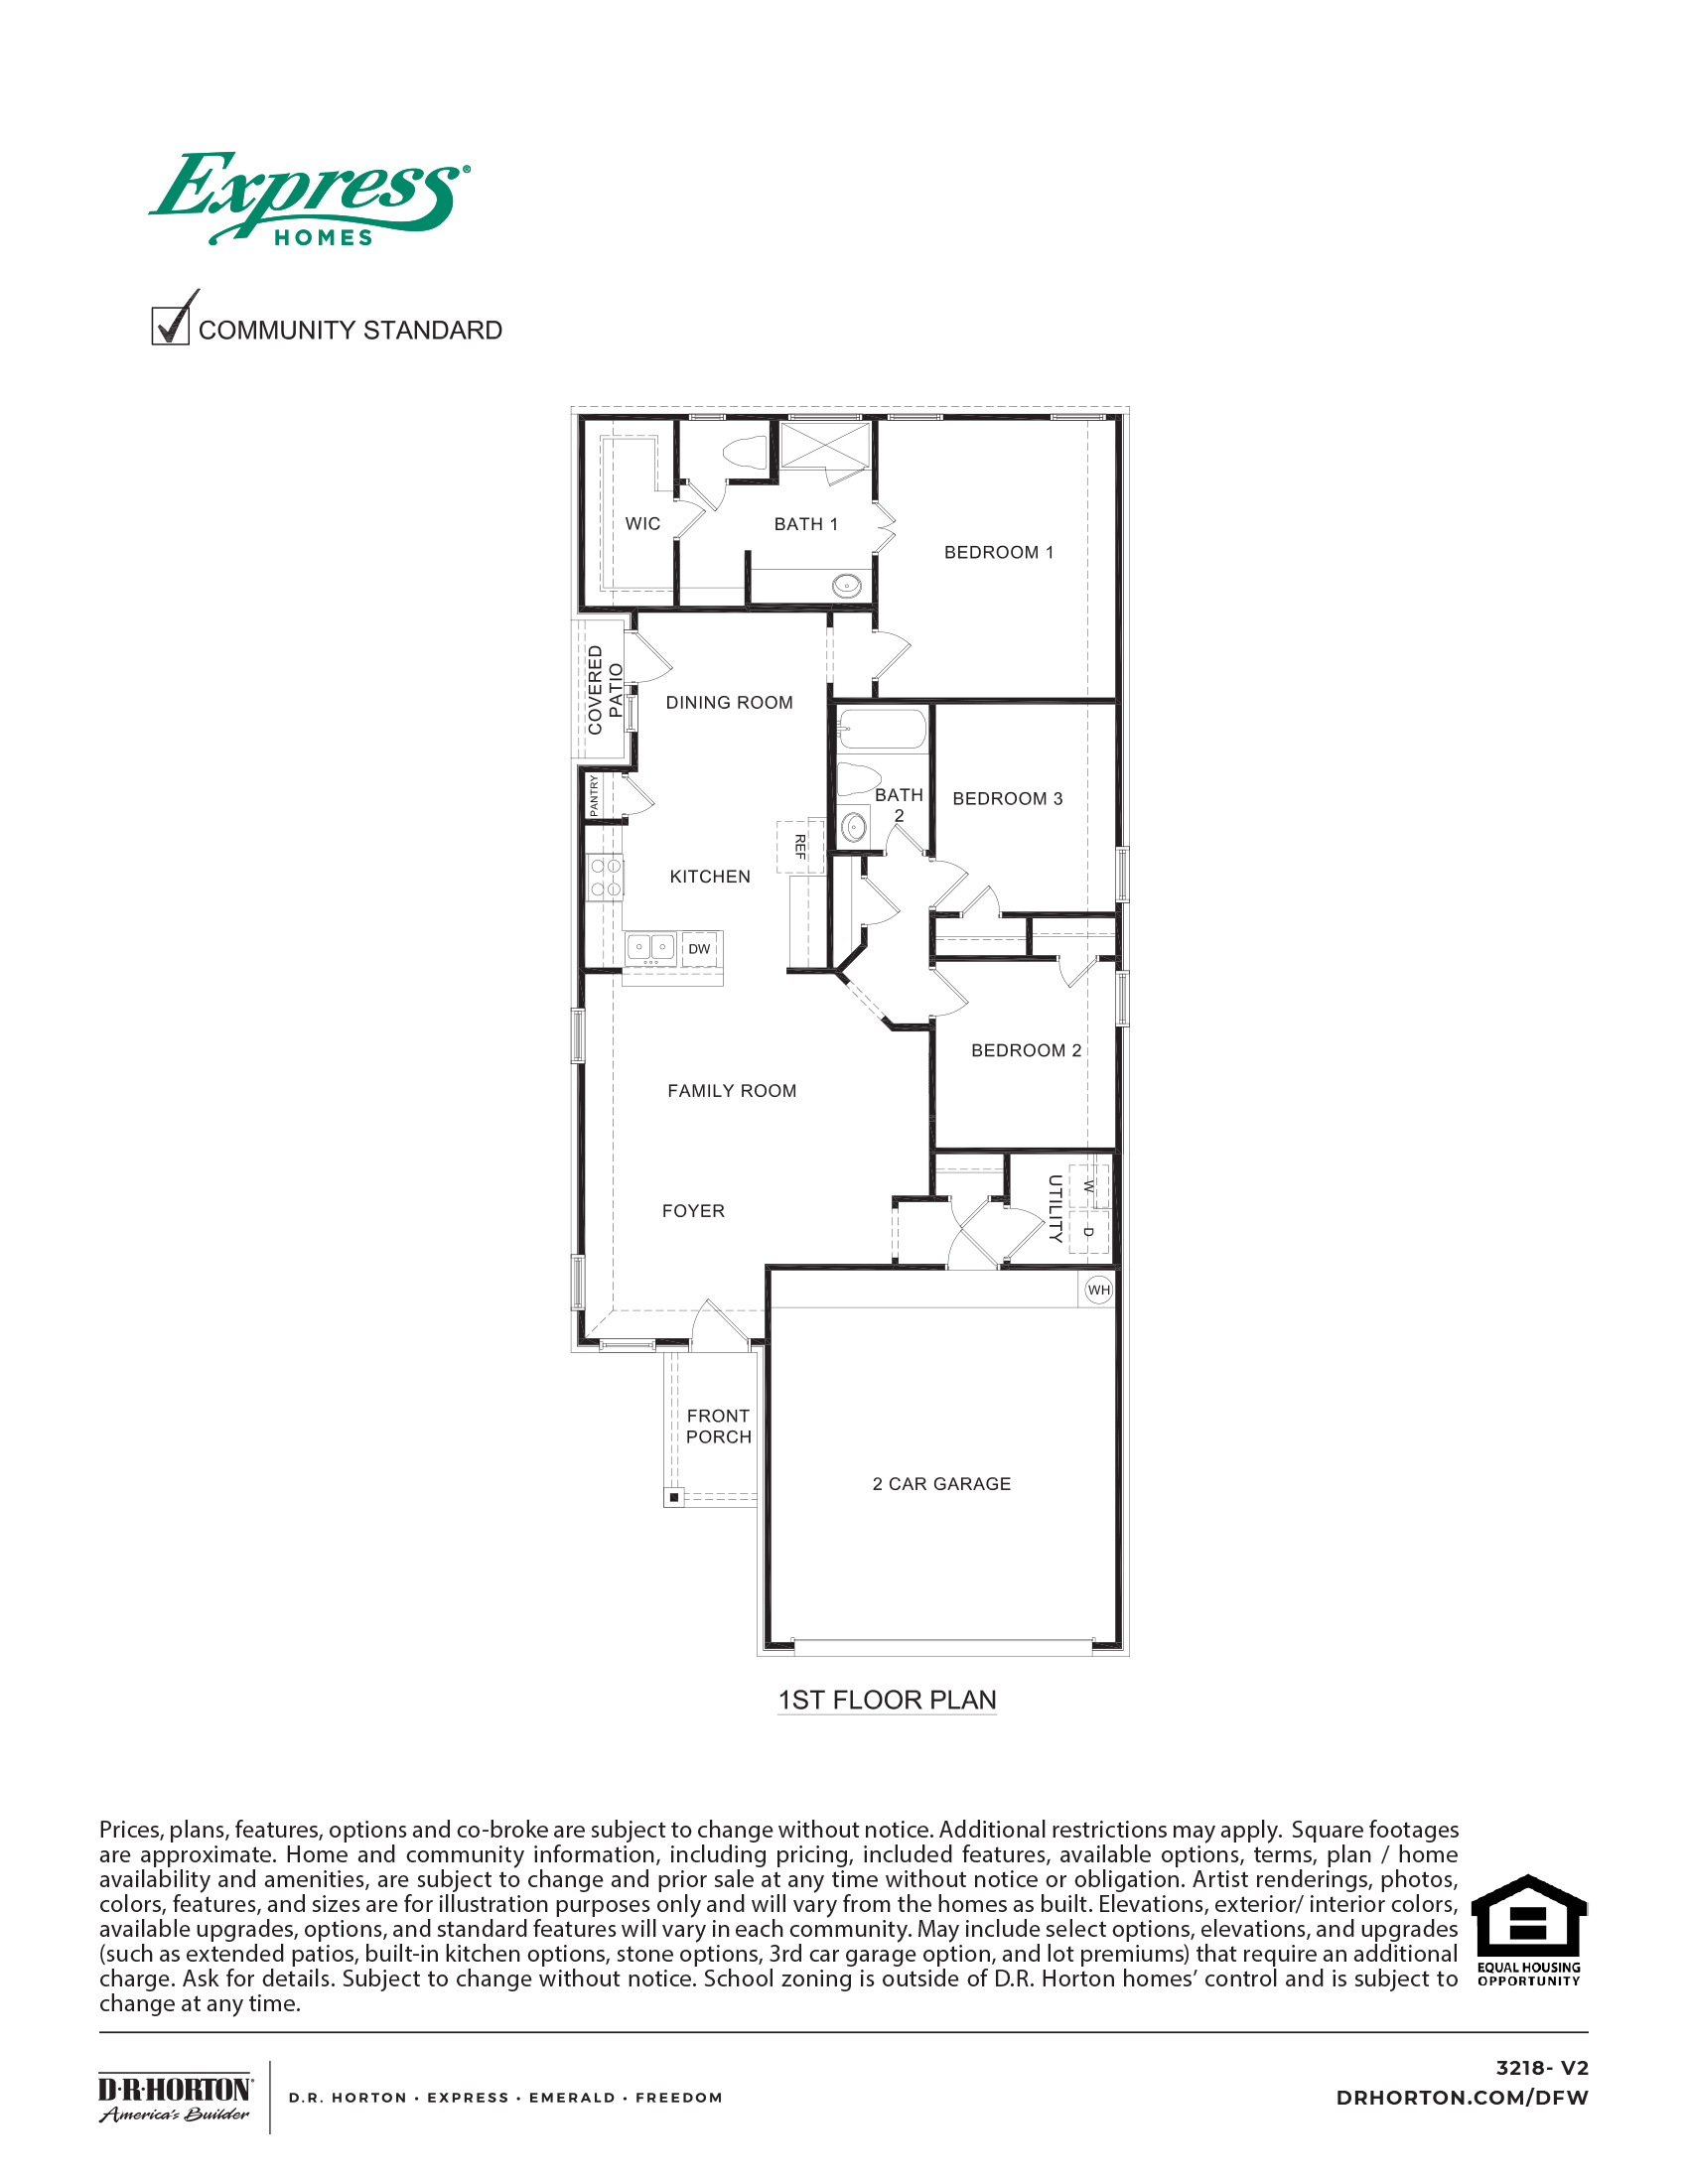 3218 Ashley floorplan rendering - Governor's Lots in Forney TX